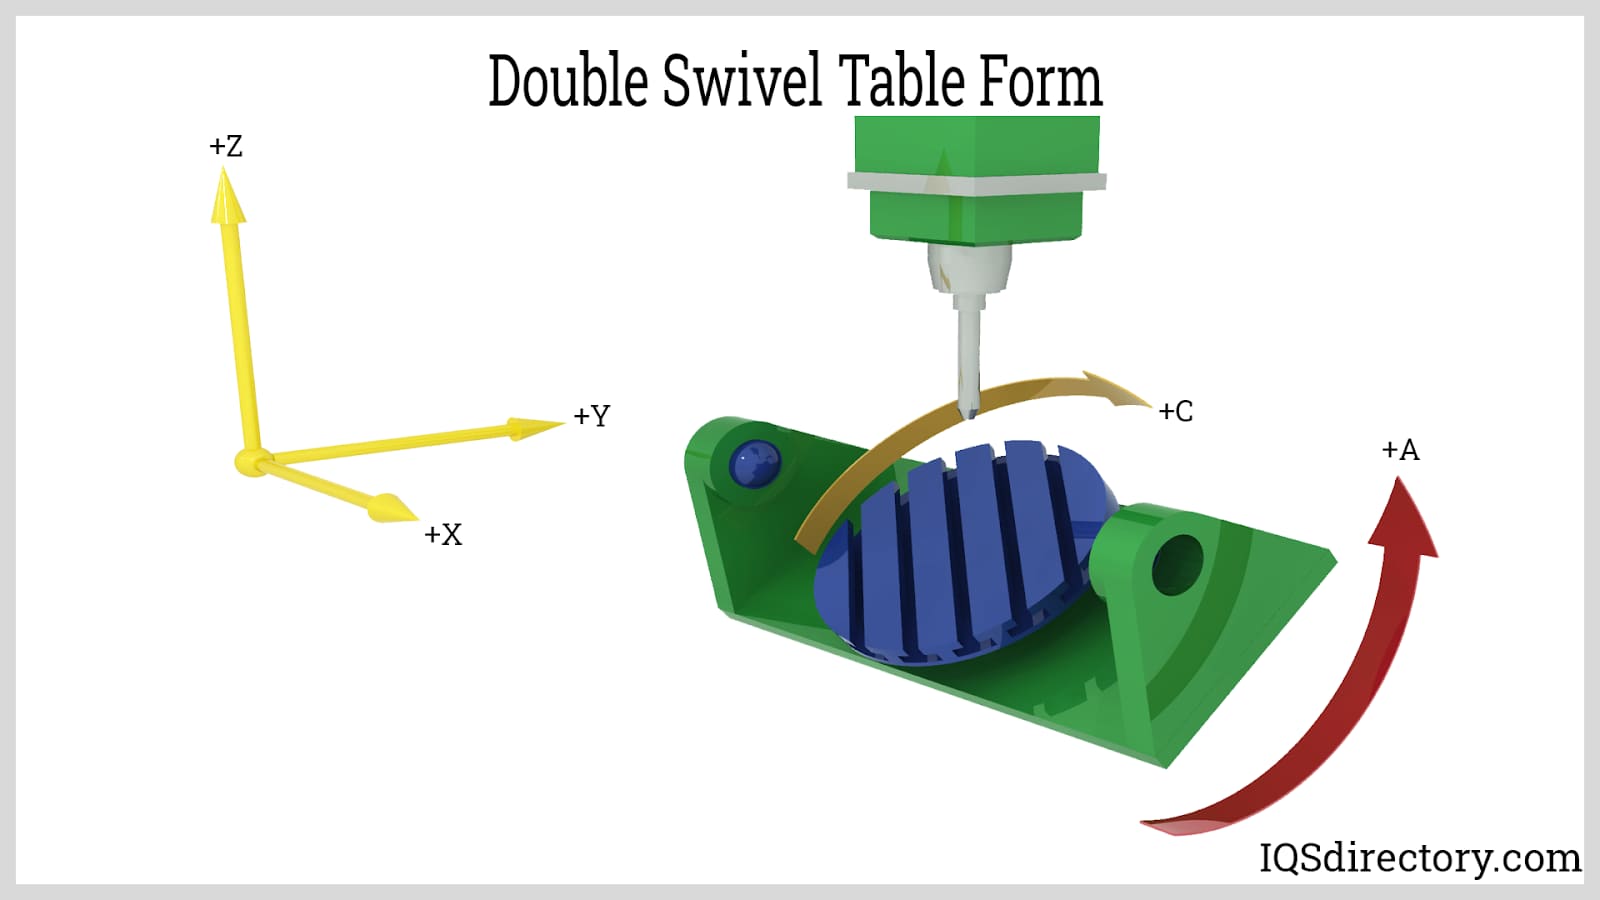 Double Swivel Table Form